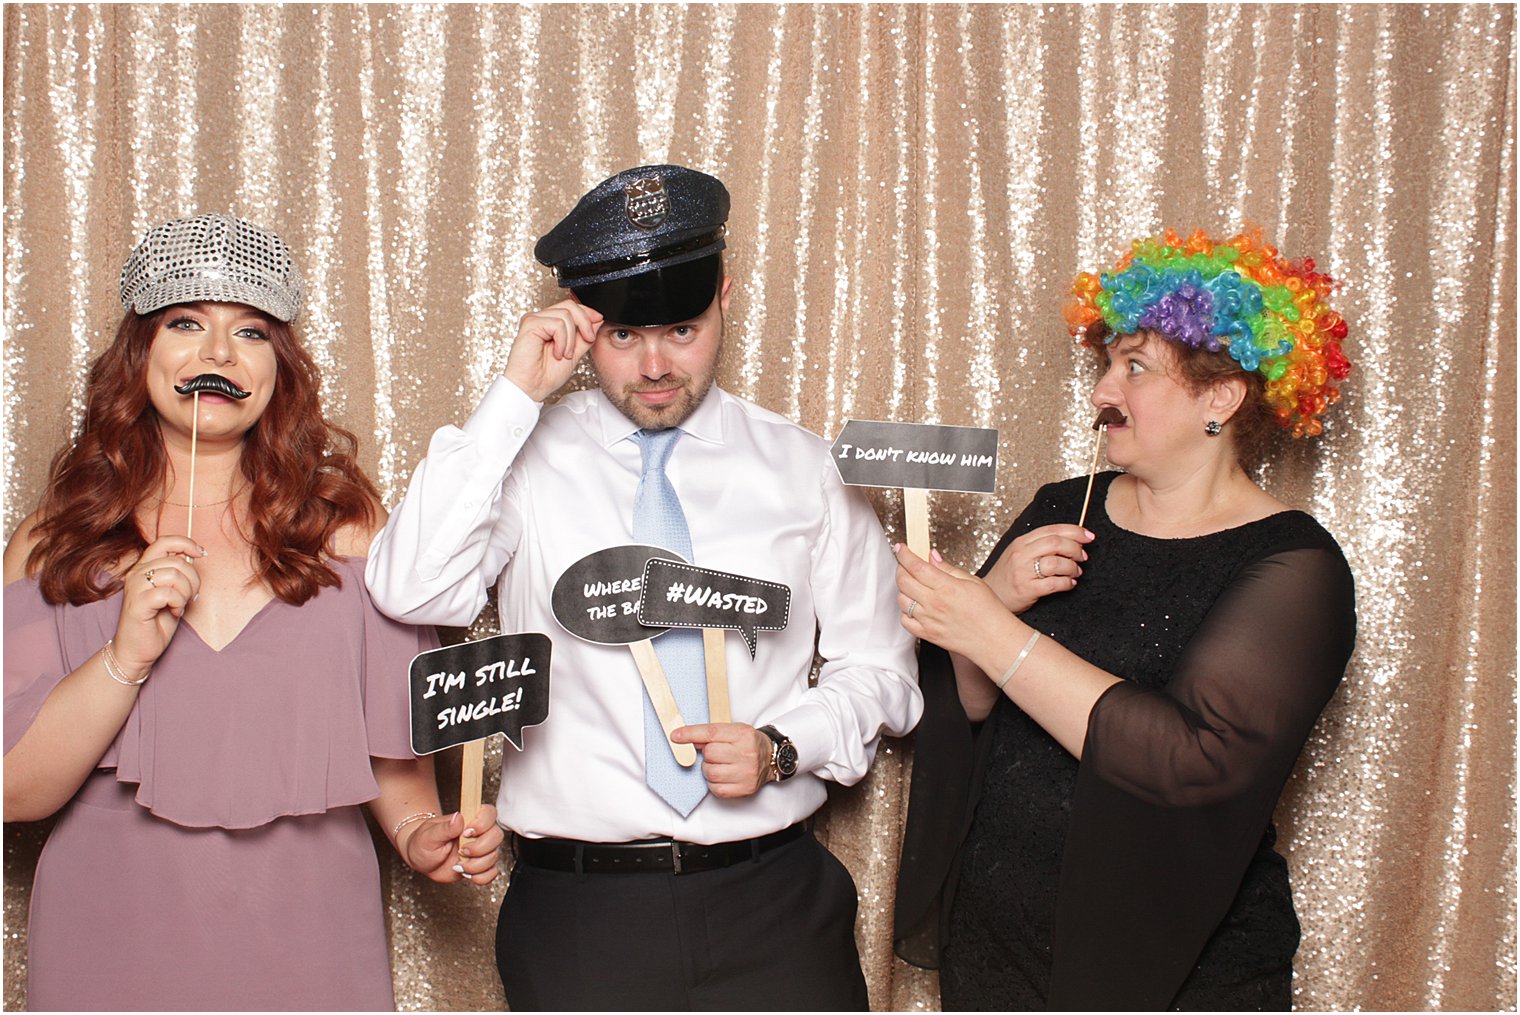 family holds signs up during photo booth at wedding reception